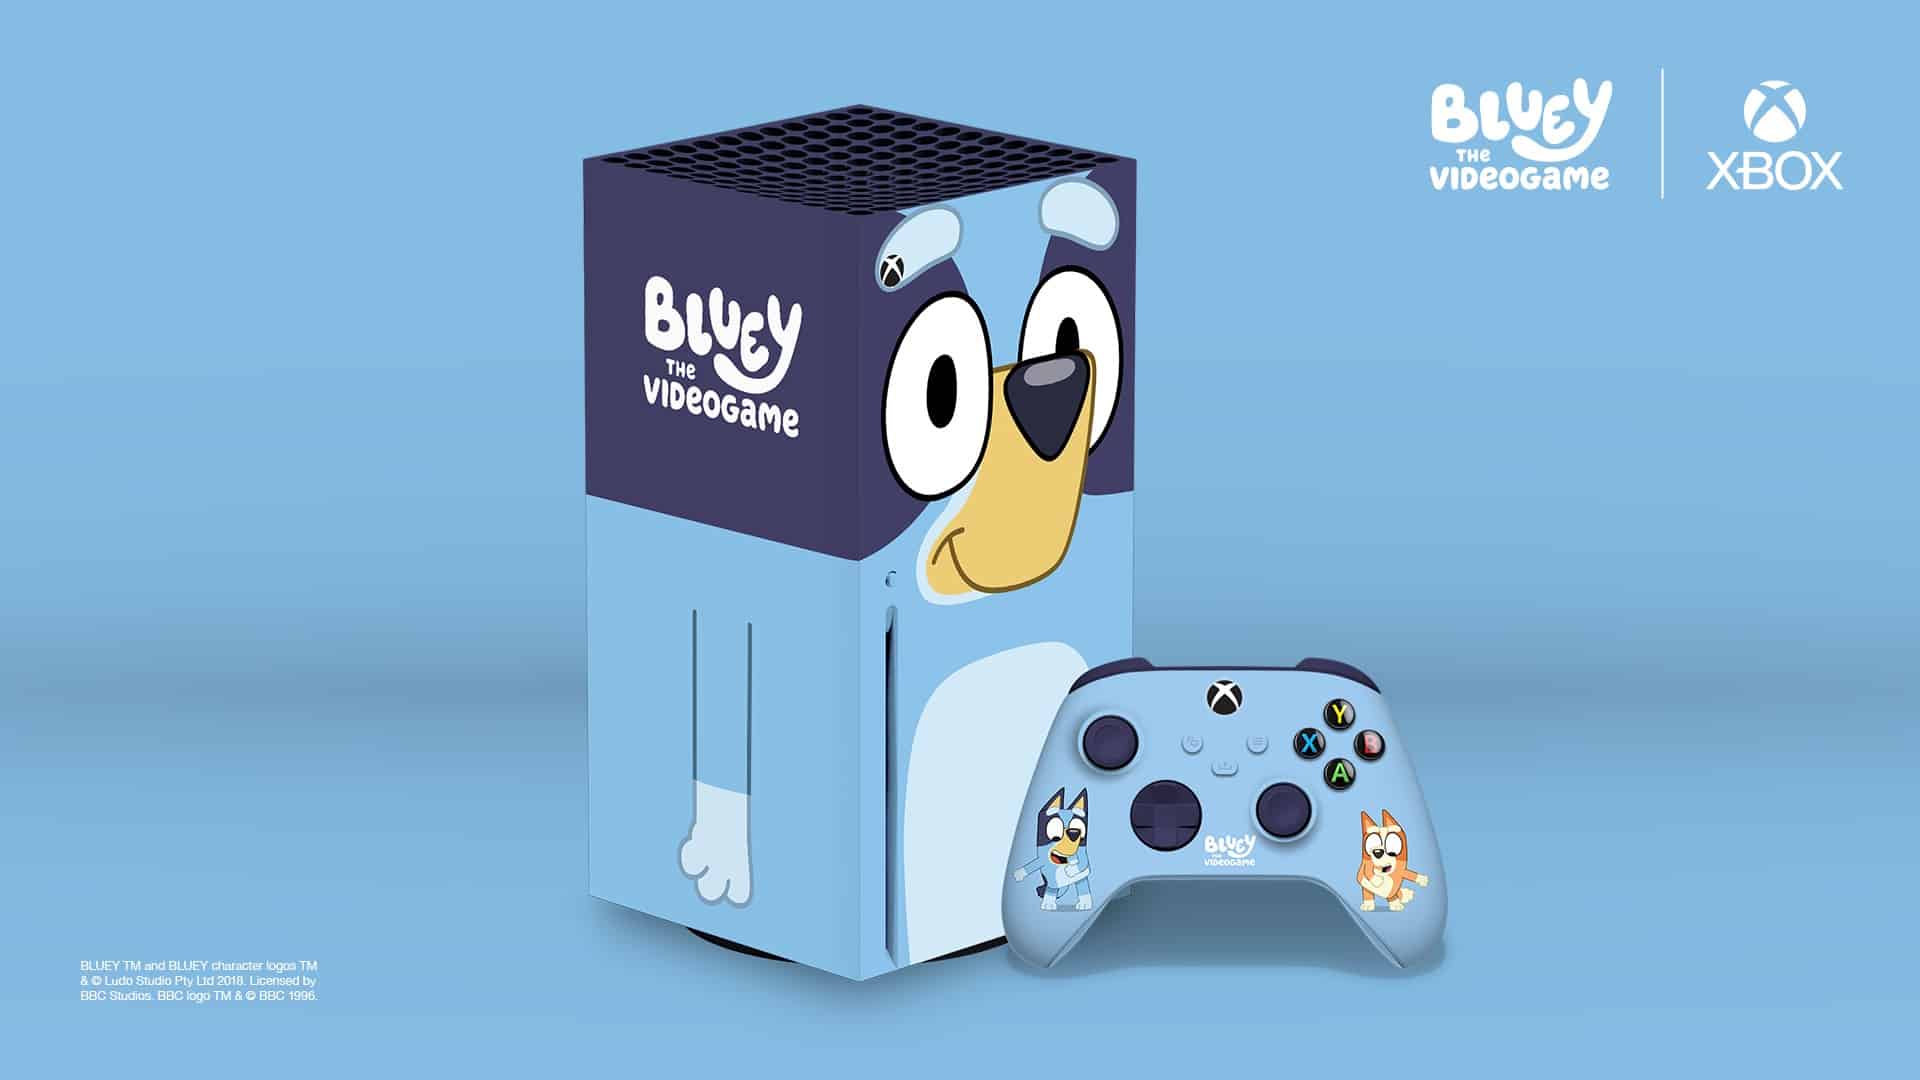 Xbox is giving away a custom Bluey Xbox console and controller